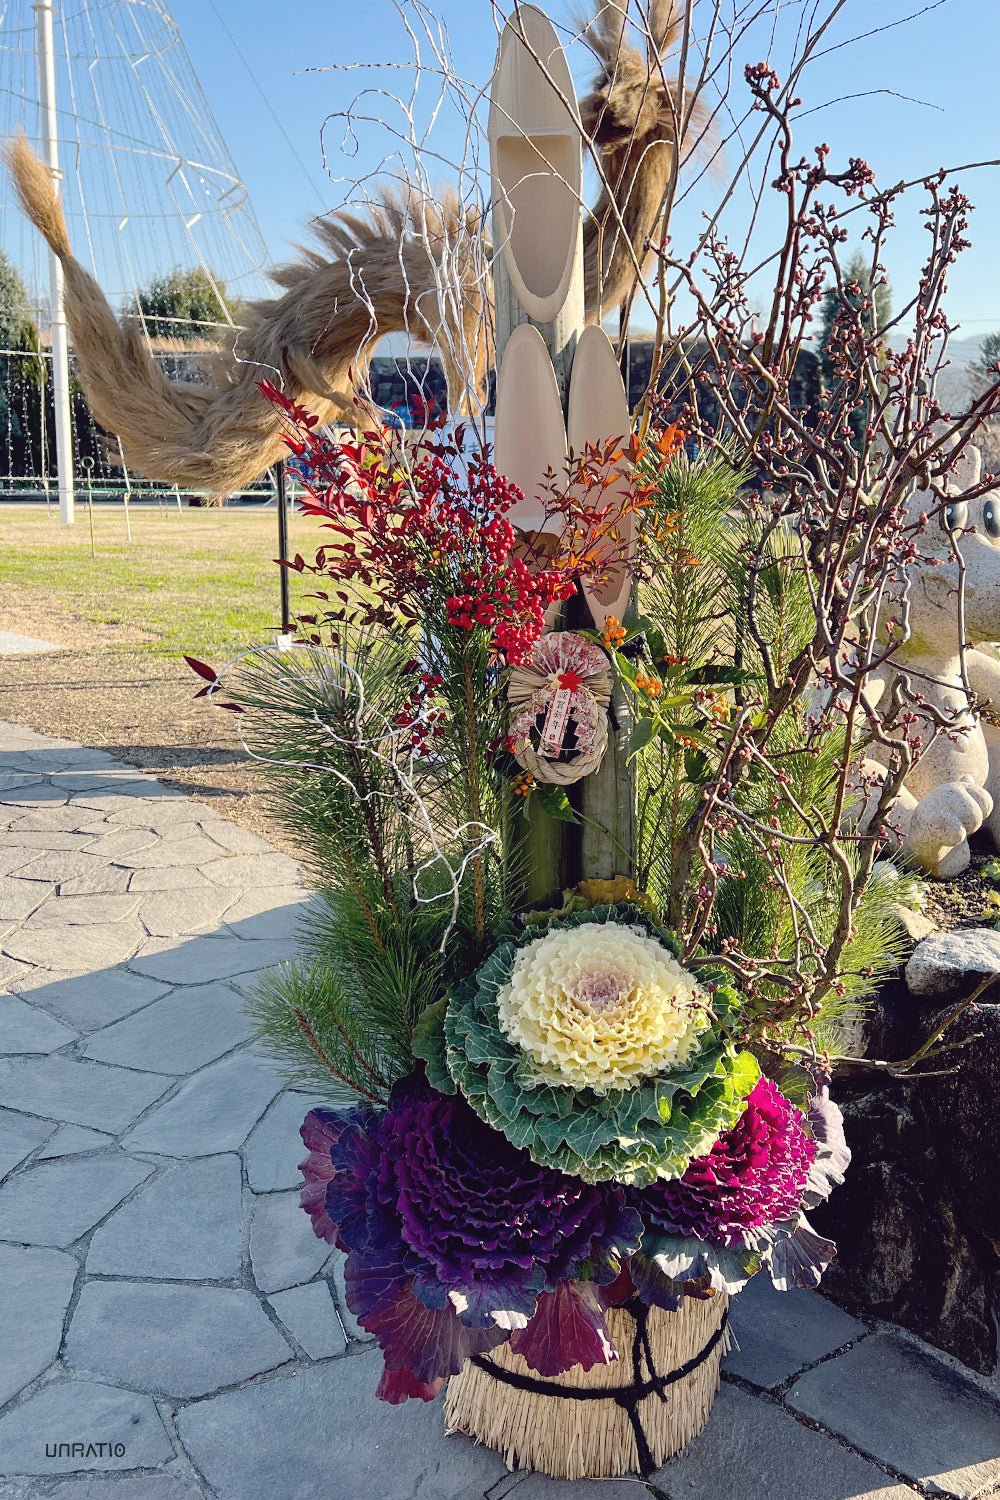 Elaborate floral arrangement featuring ornamental cabbages, pine branches, and bright berries, set against a park with artistic sculptures.